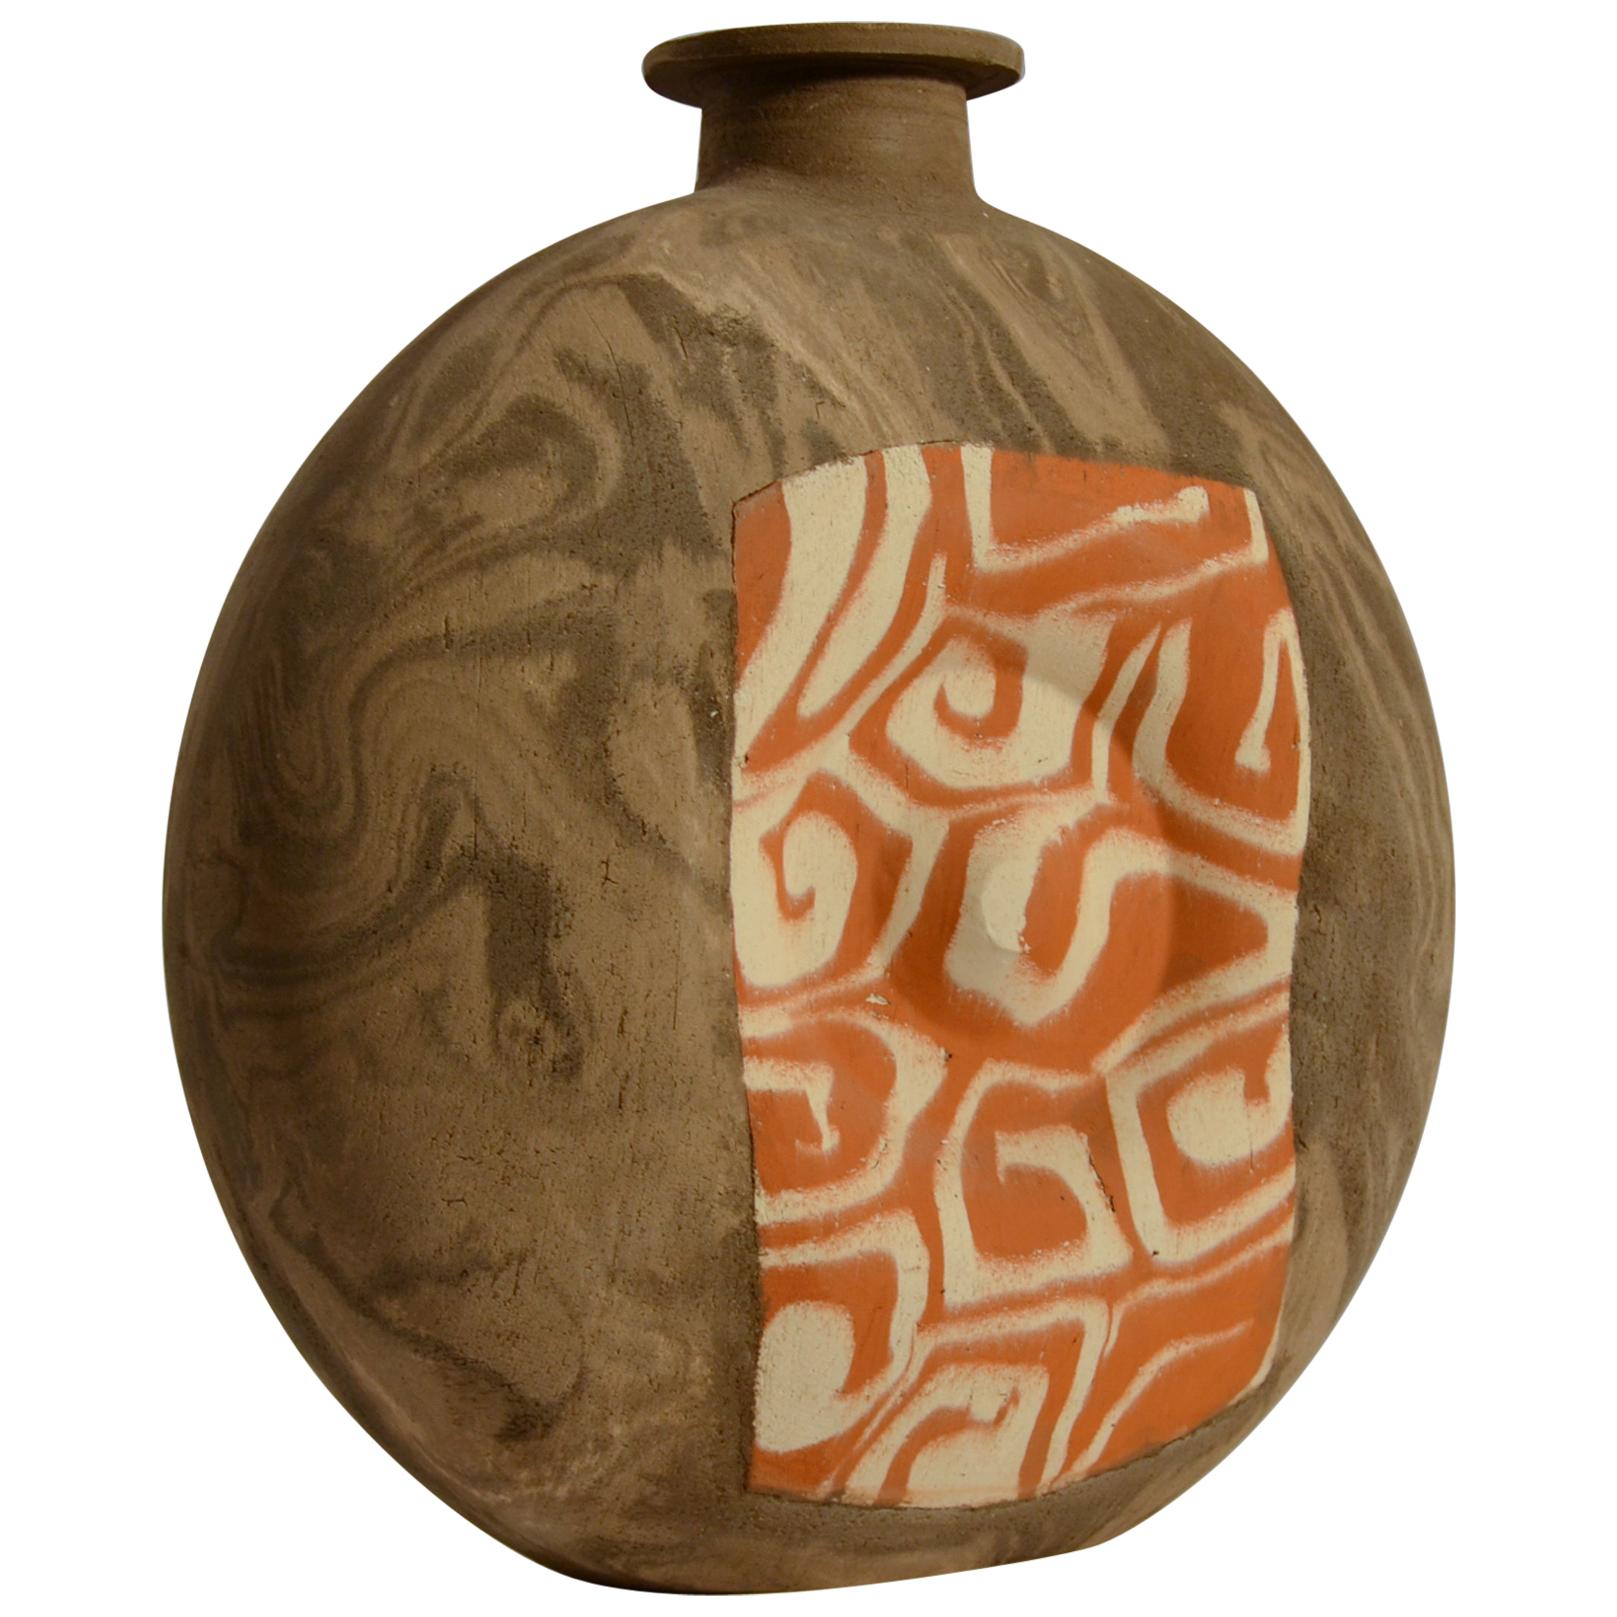 Large Decorative Studio Pottery Vases in Geometric Patterns and Earth Tones